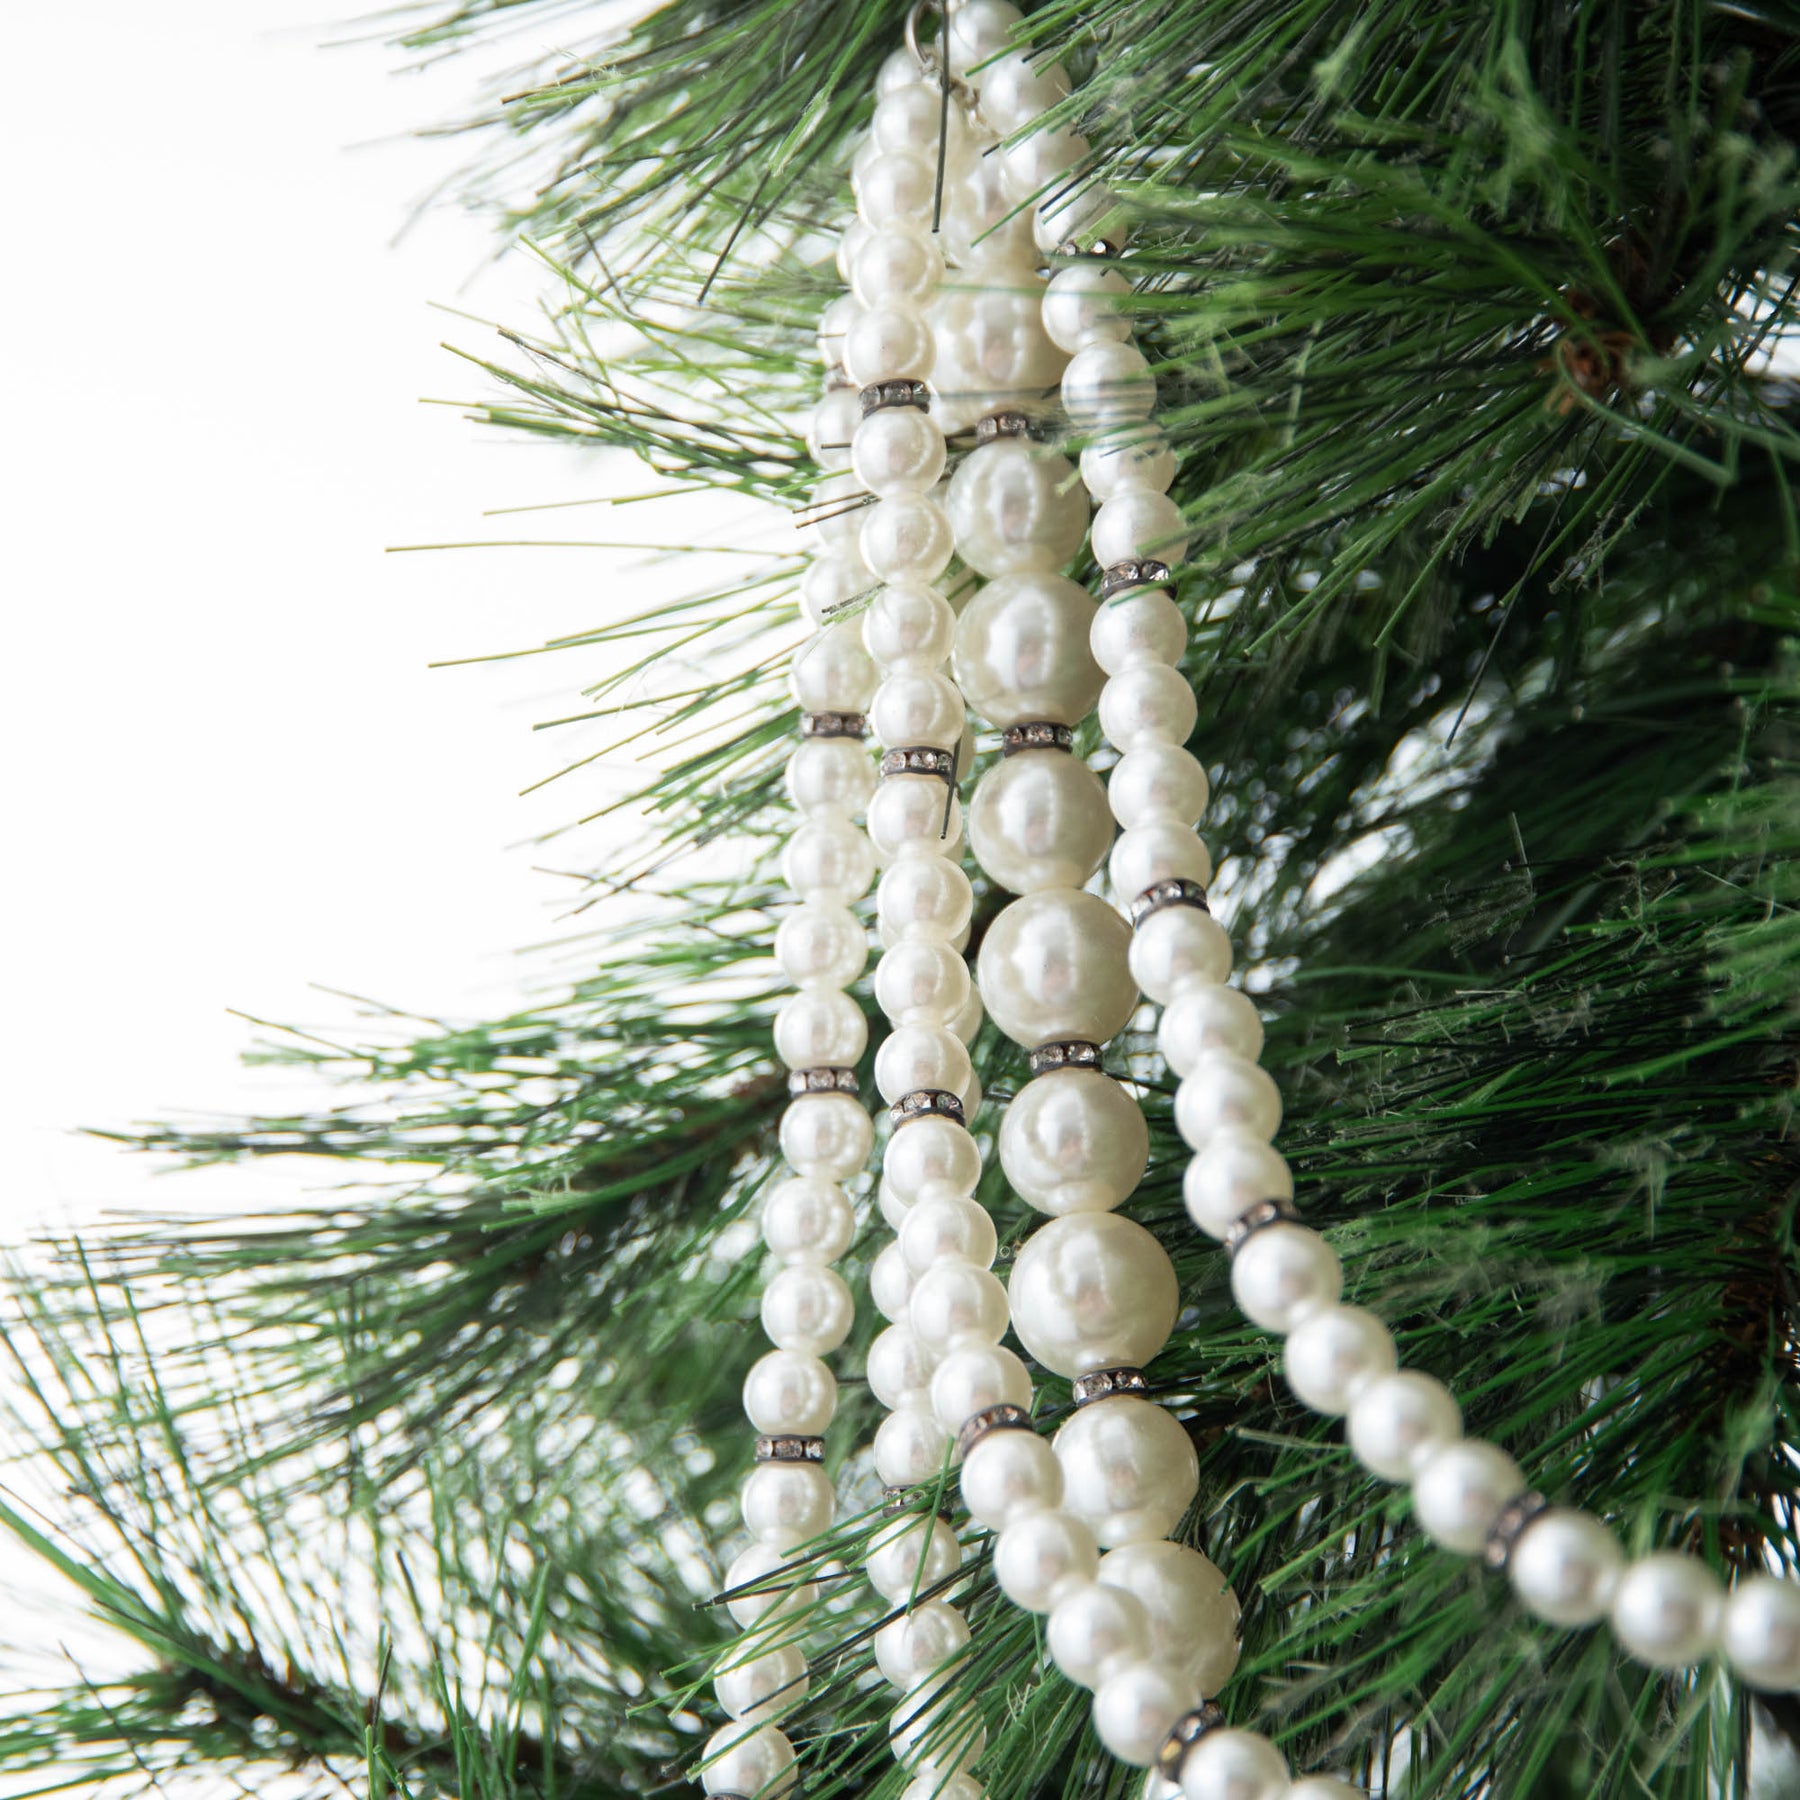 Five Strand Draping Faux Pearl & Crystal Christmas Garland Tree Décor –  Darby Creek Trading